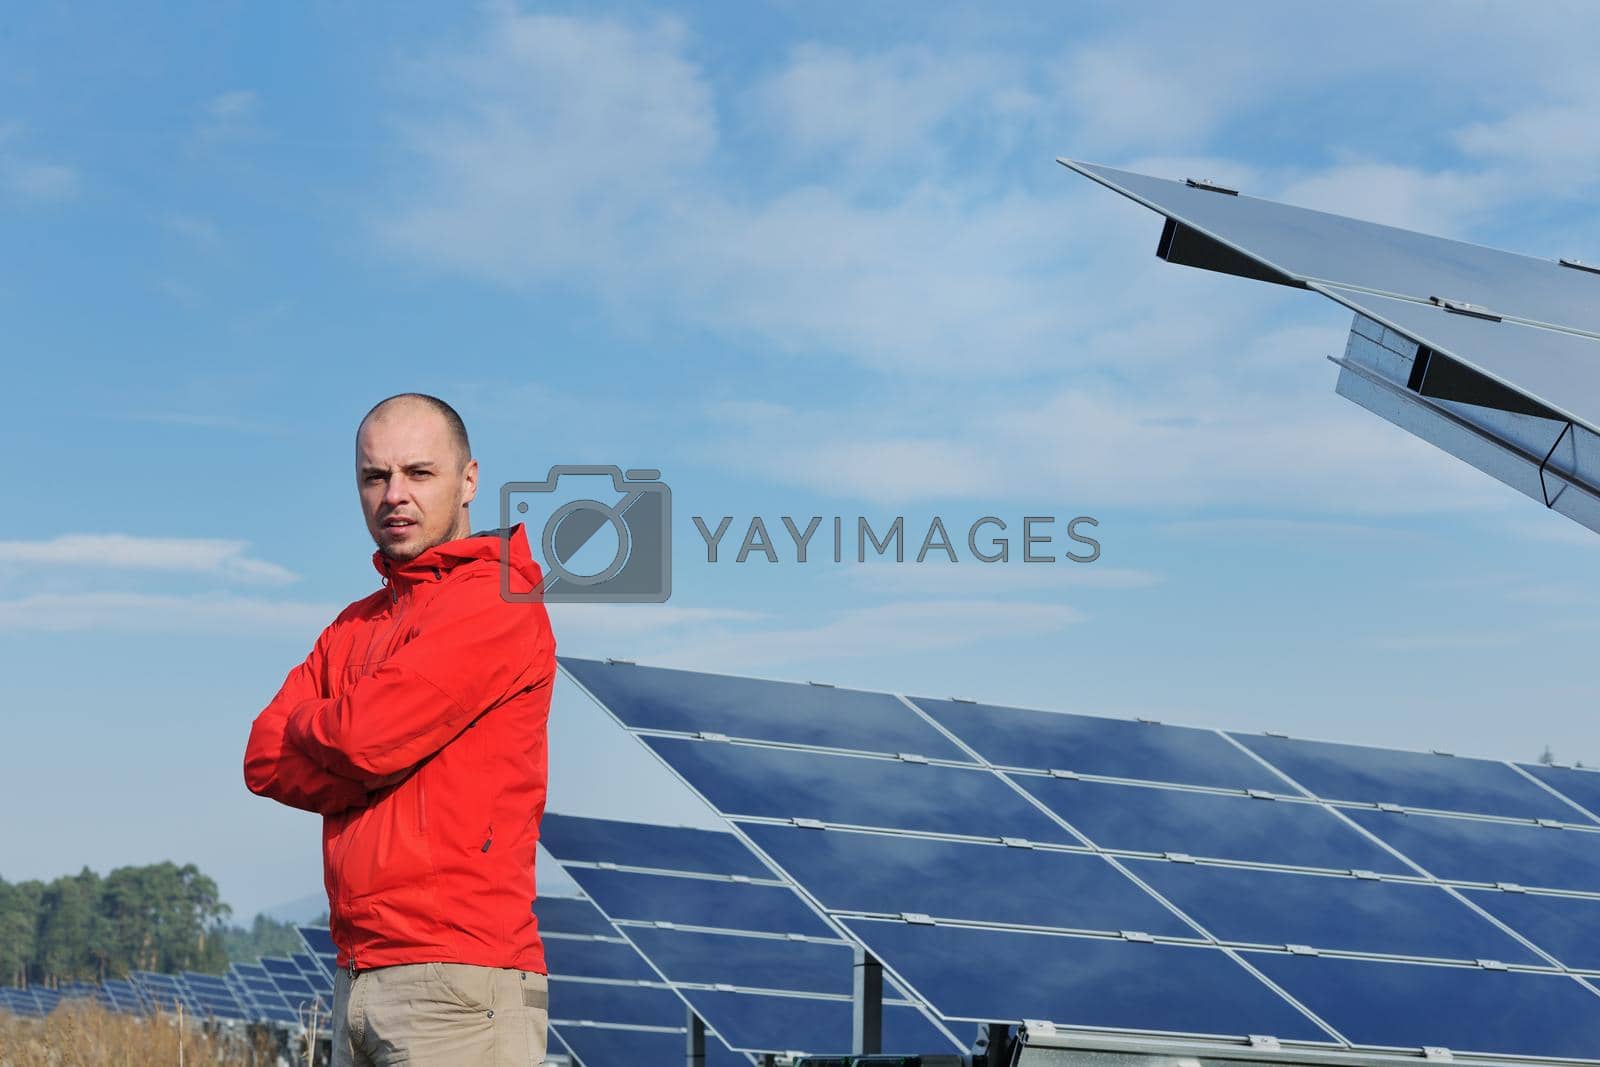 Royalty free image of Male solar panel engineer at work place by dotshock